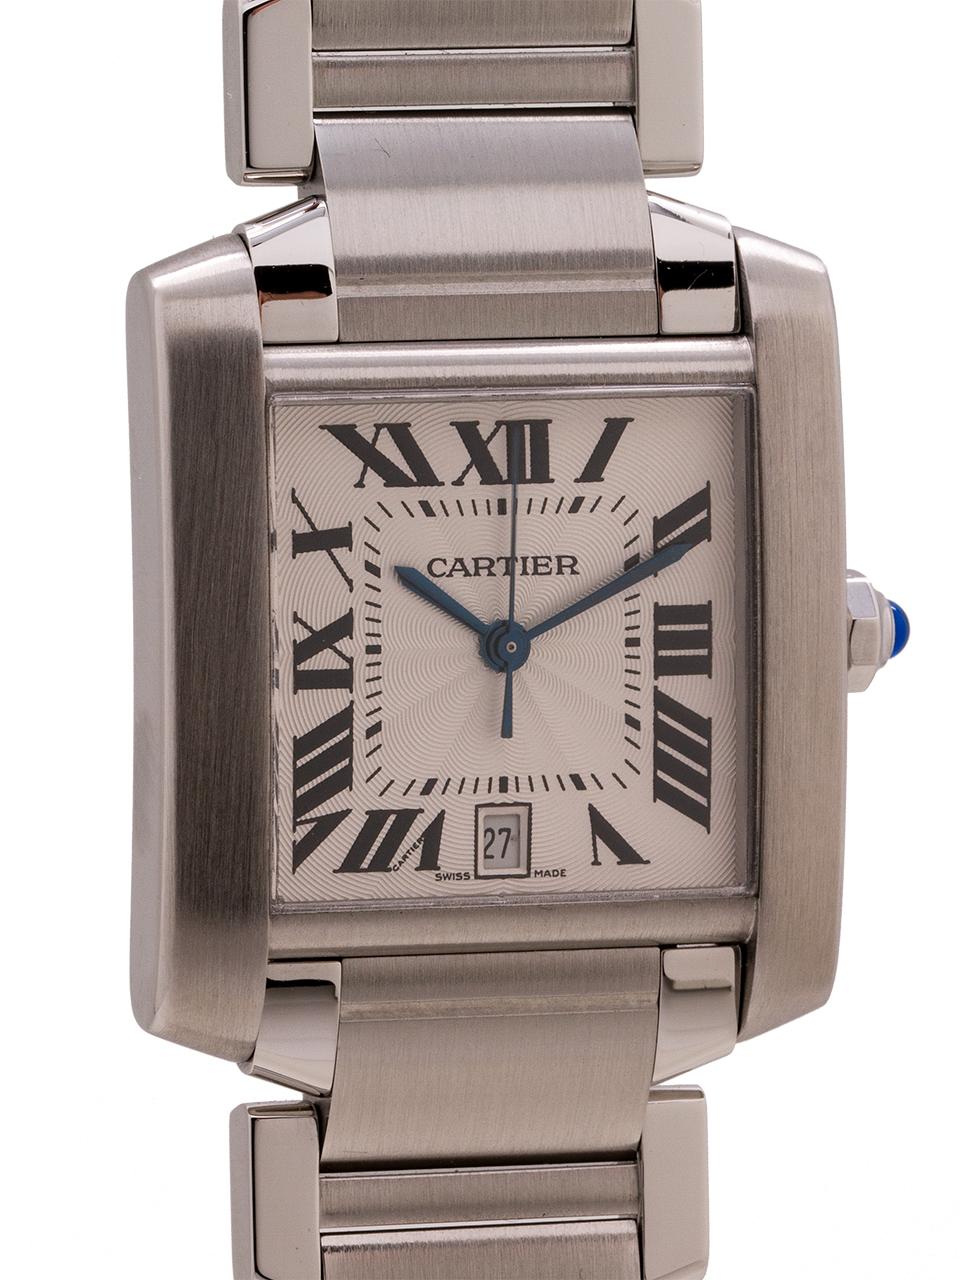 
Cartier Man’s stainless steel Tank Francaise automatic case ref 2302 circa 2000’s. Man’s model 28 x 42mm featuring guilloche textured matte silver satin dial with black Roman figures, blued steel hands, and cabochon sapphire crown. Powered by self